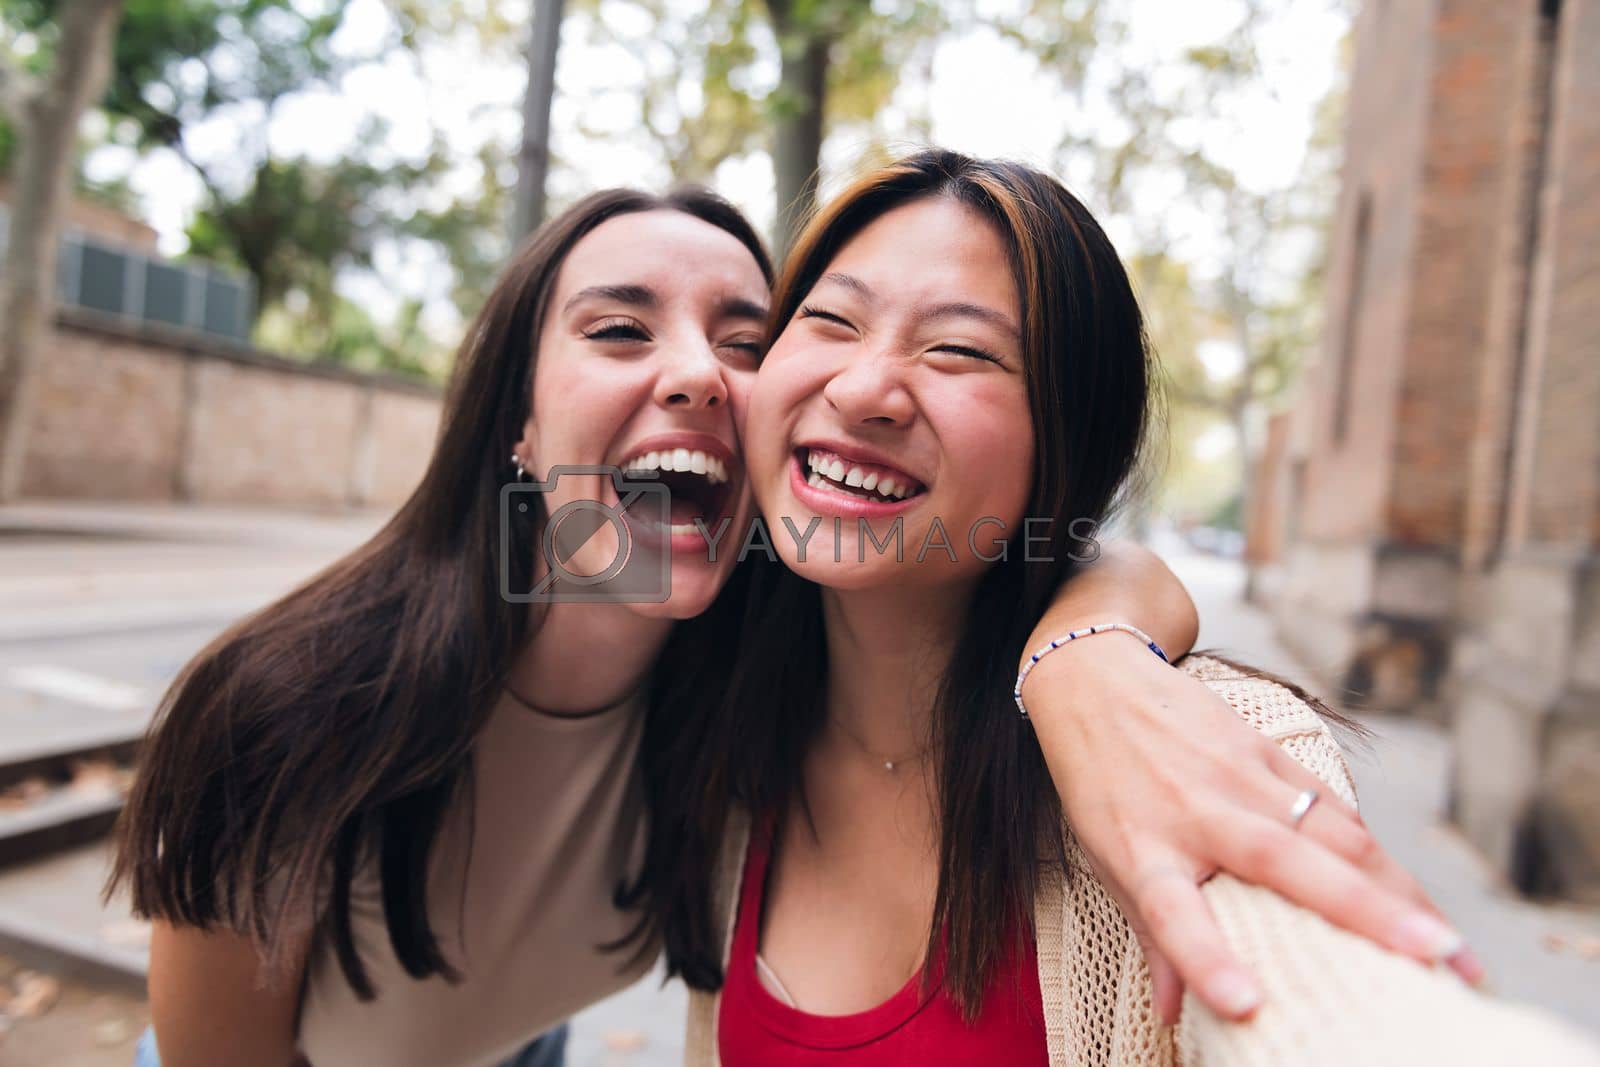 Royalty free image of women laughing and having fun while dating by raulmelldo